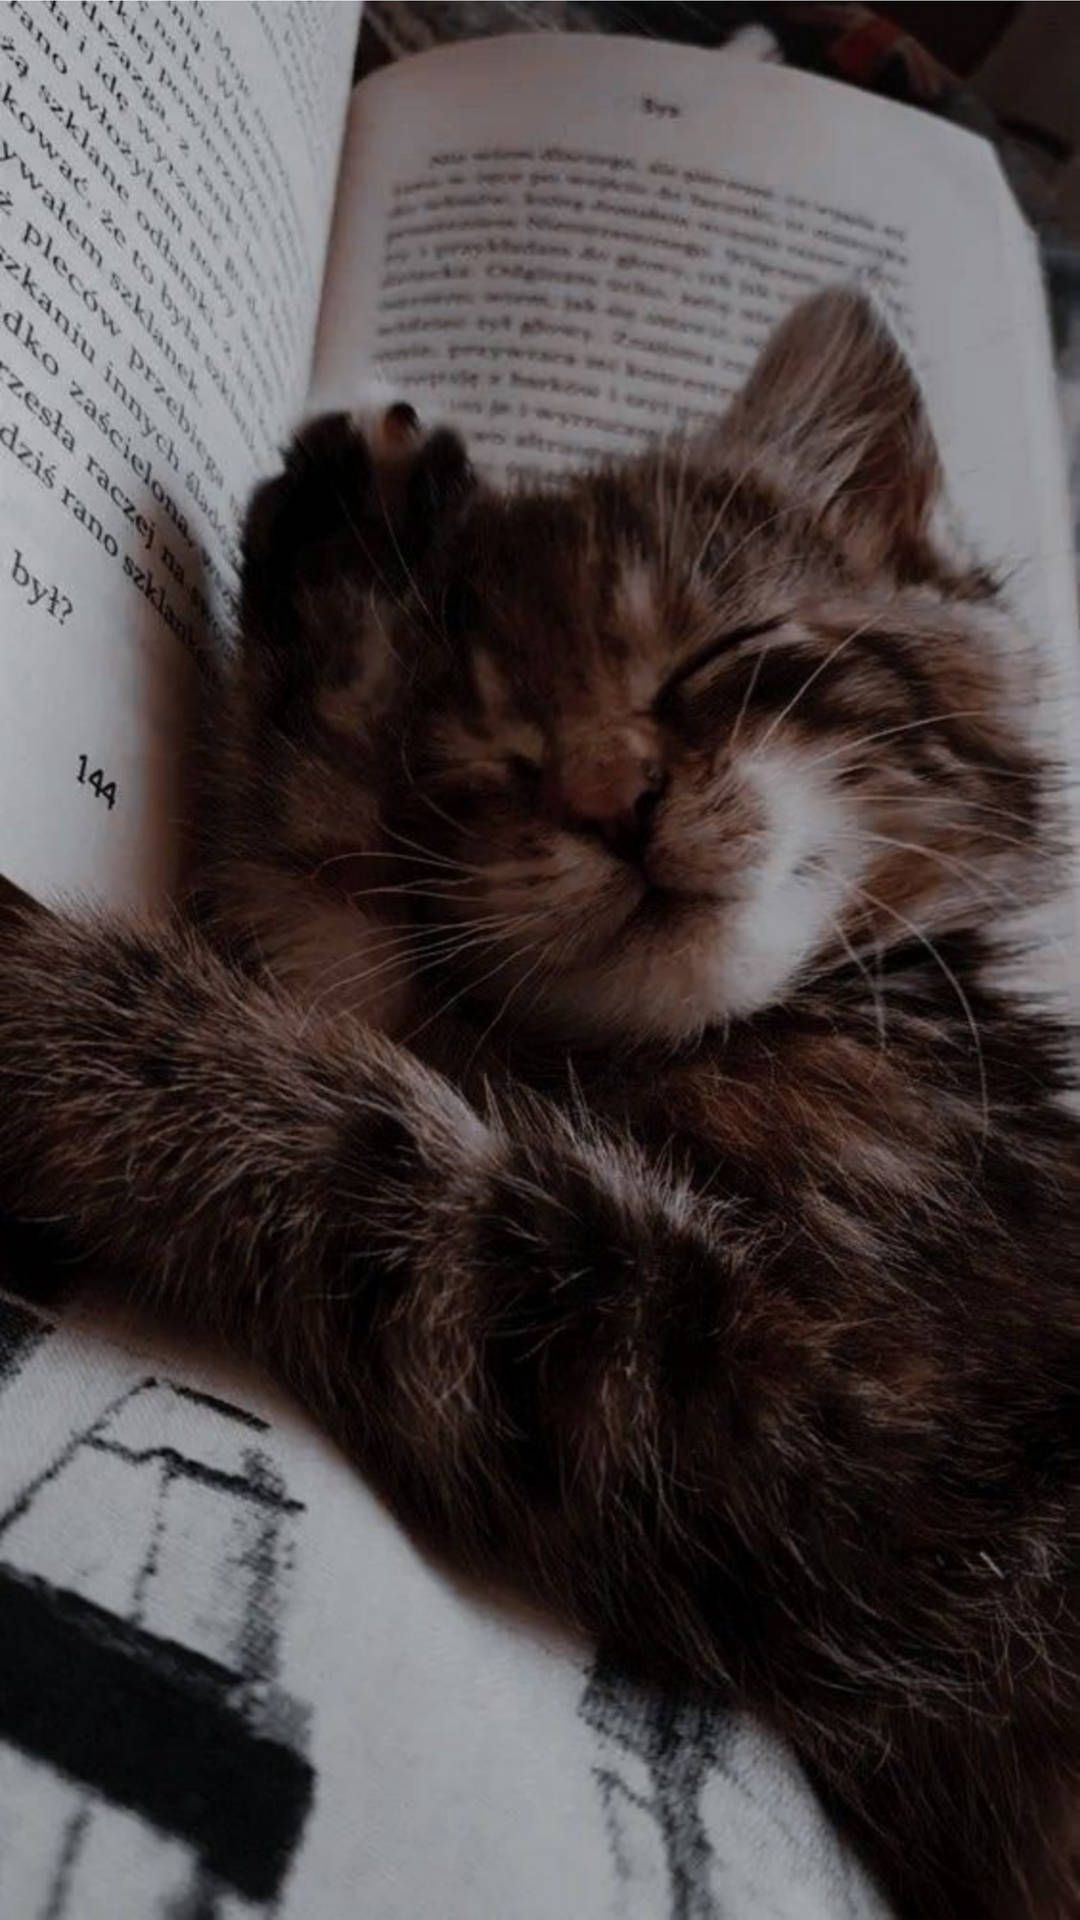 Cute Cat Aesthetic Sleeping On The Book